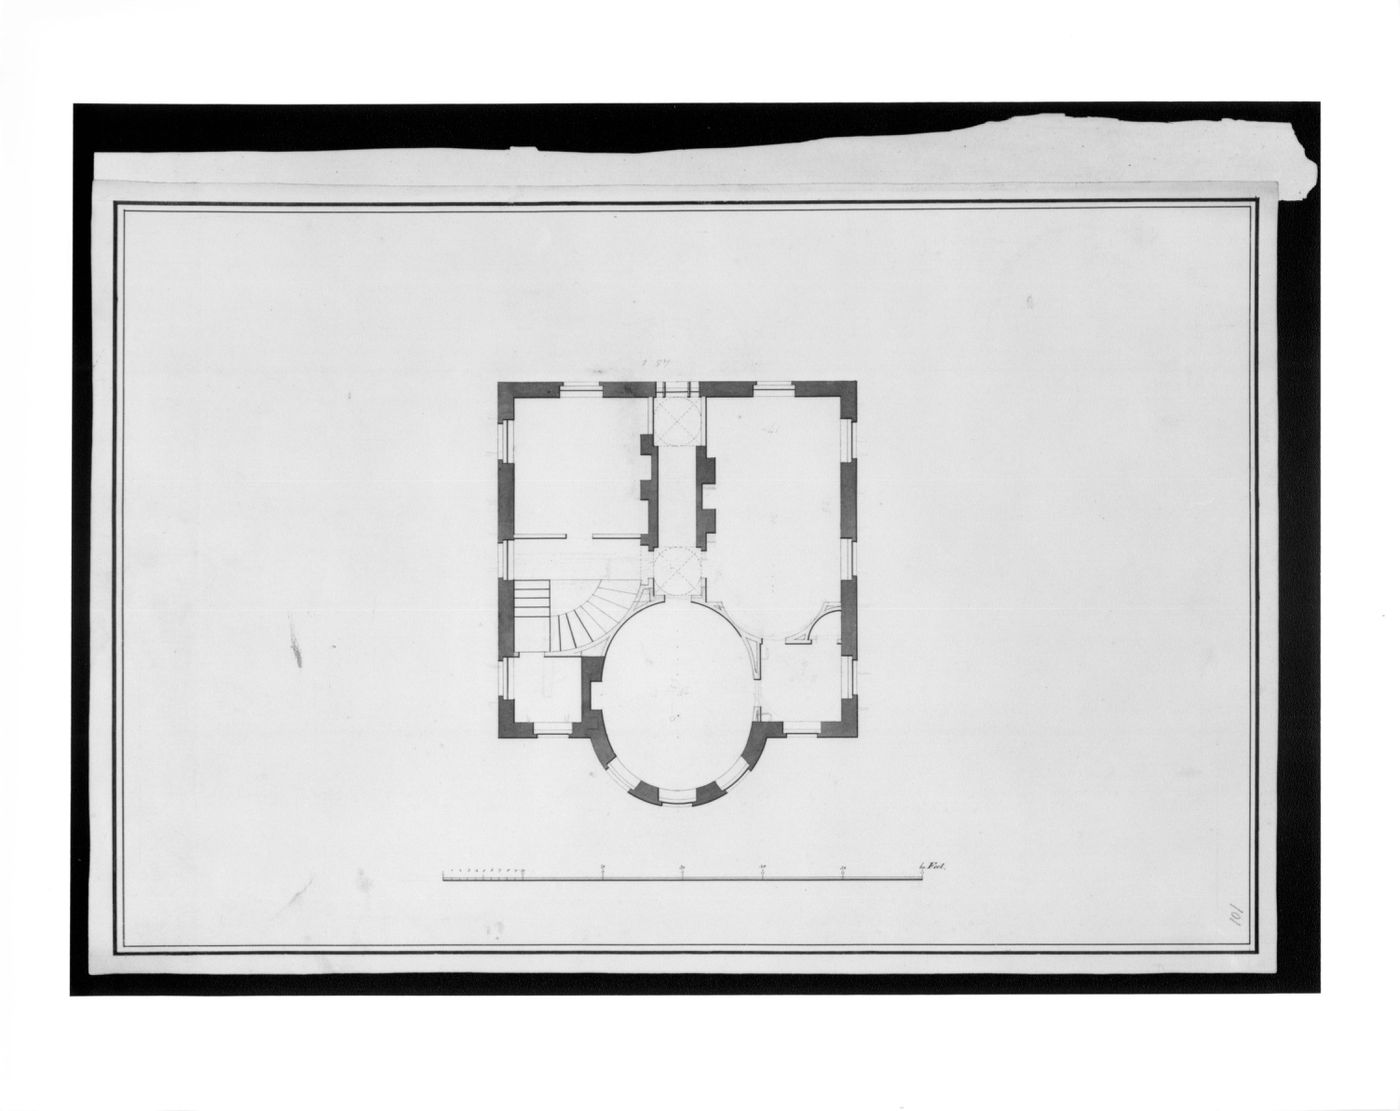 Design for a house - plan of bedroom floor